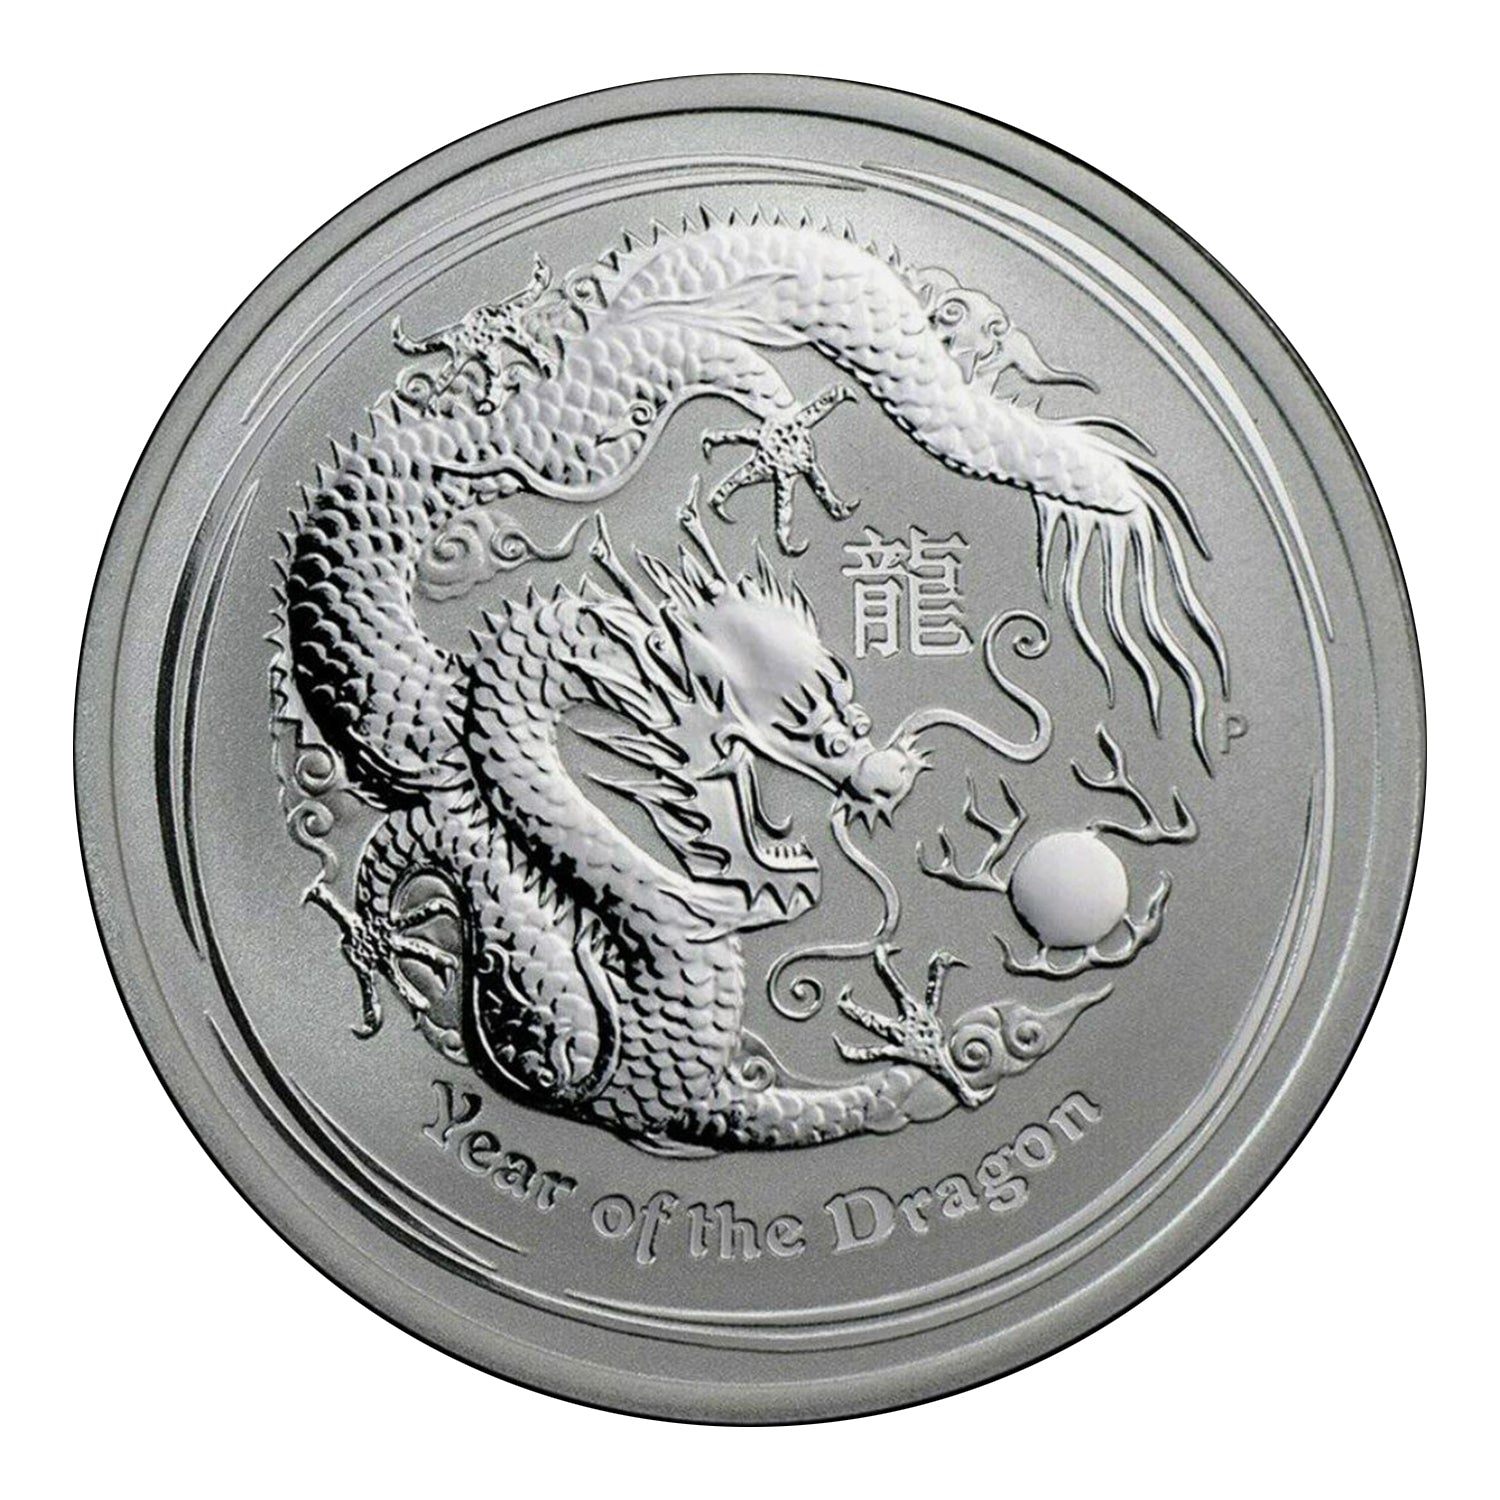 2012 1/2 oz Australian Lunar Year of the Dragon Silver Coin Mint State Condition